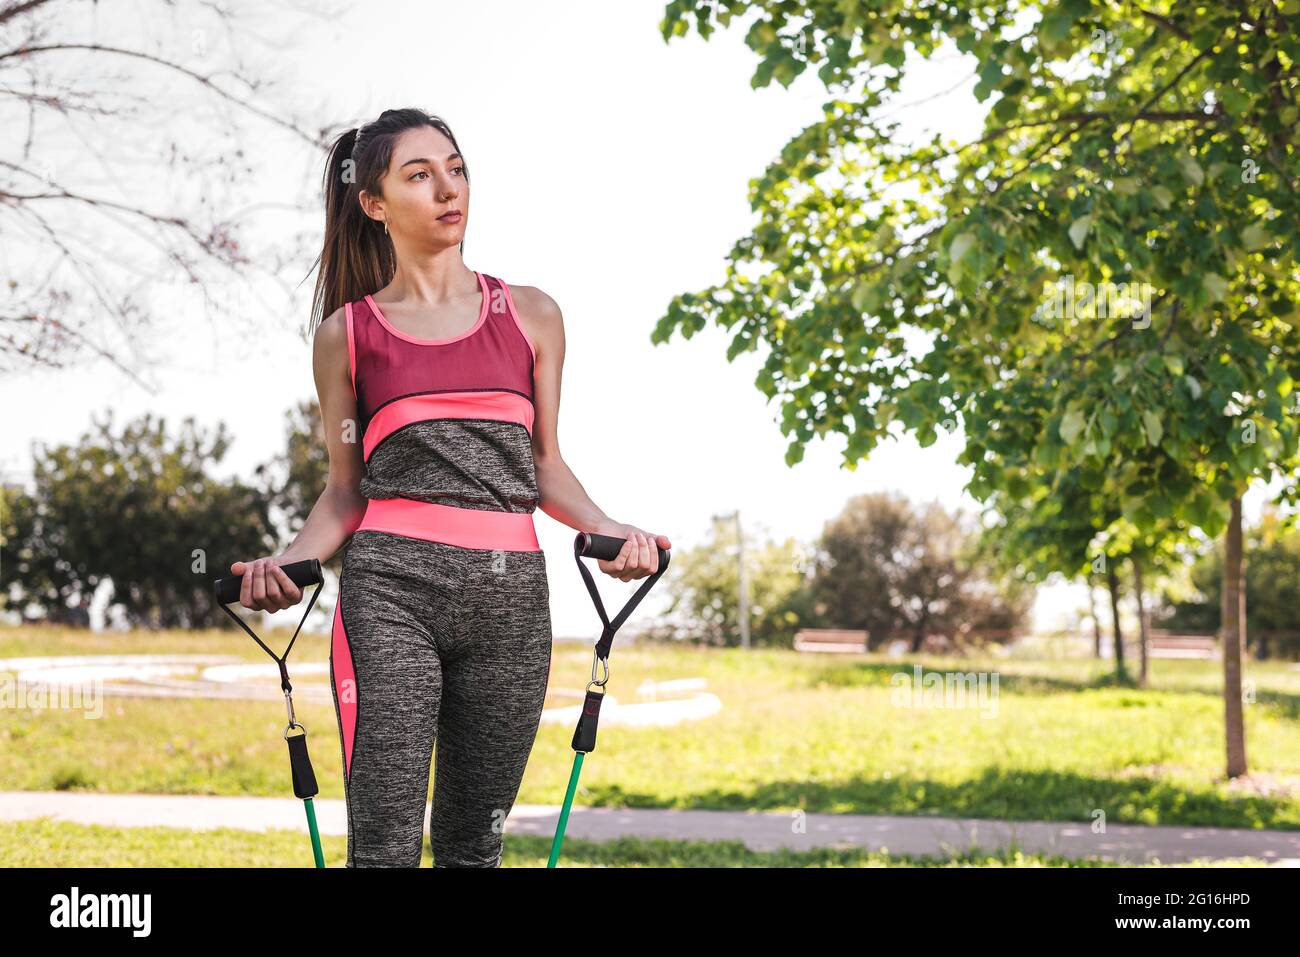 horizontal portrait of a young caucasian woman exercising in a park. She is wearing sport clothes and uses resistance bands Stock Photo